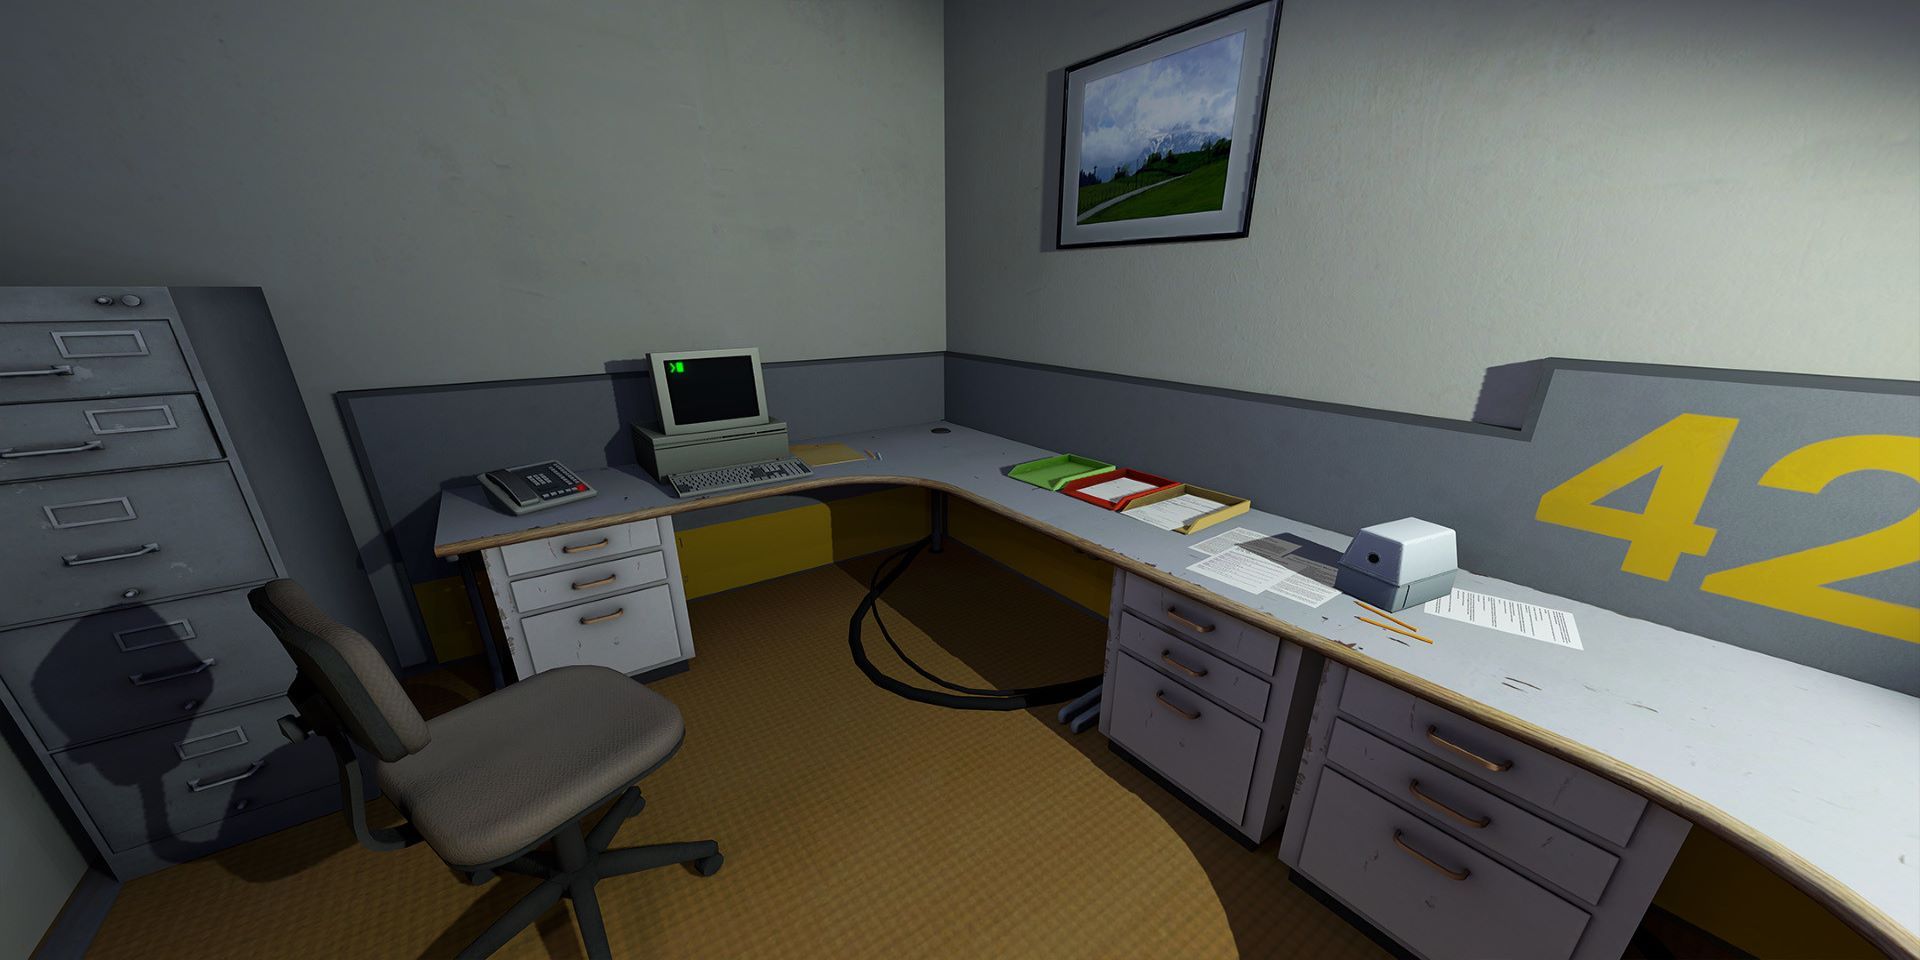 Stanley Parable ULTRA DELUXE